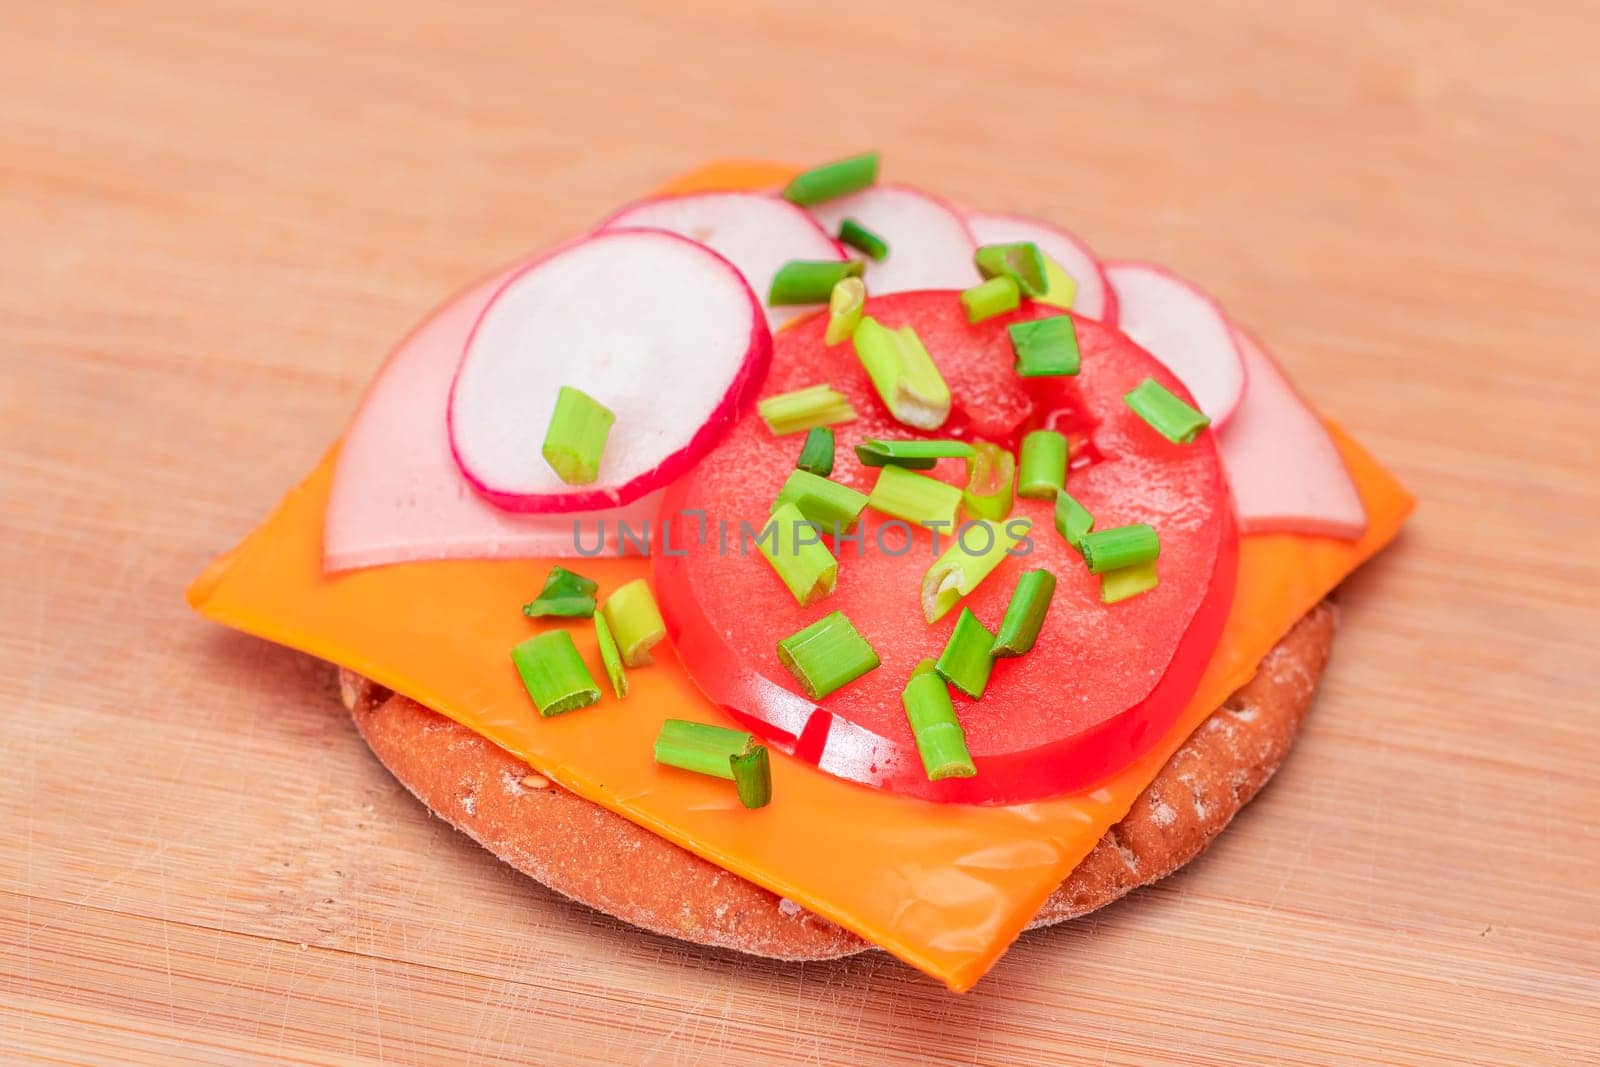 Crispy Cracker Sandwich with Tomato, Sausage, Cheese, Green Onions and Radish by InfinitumProdux